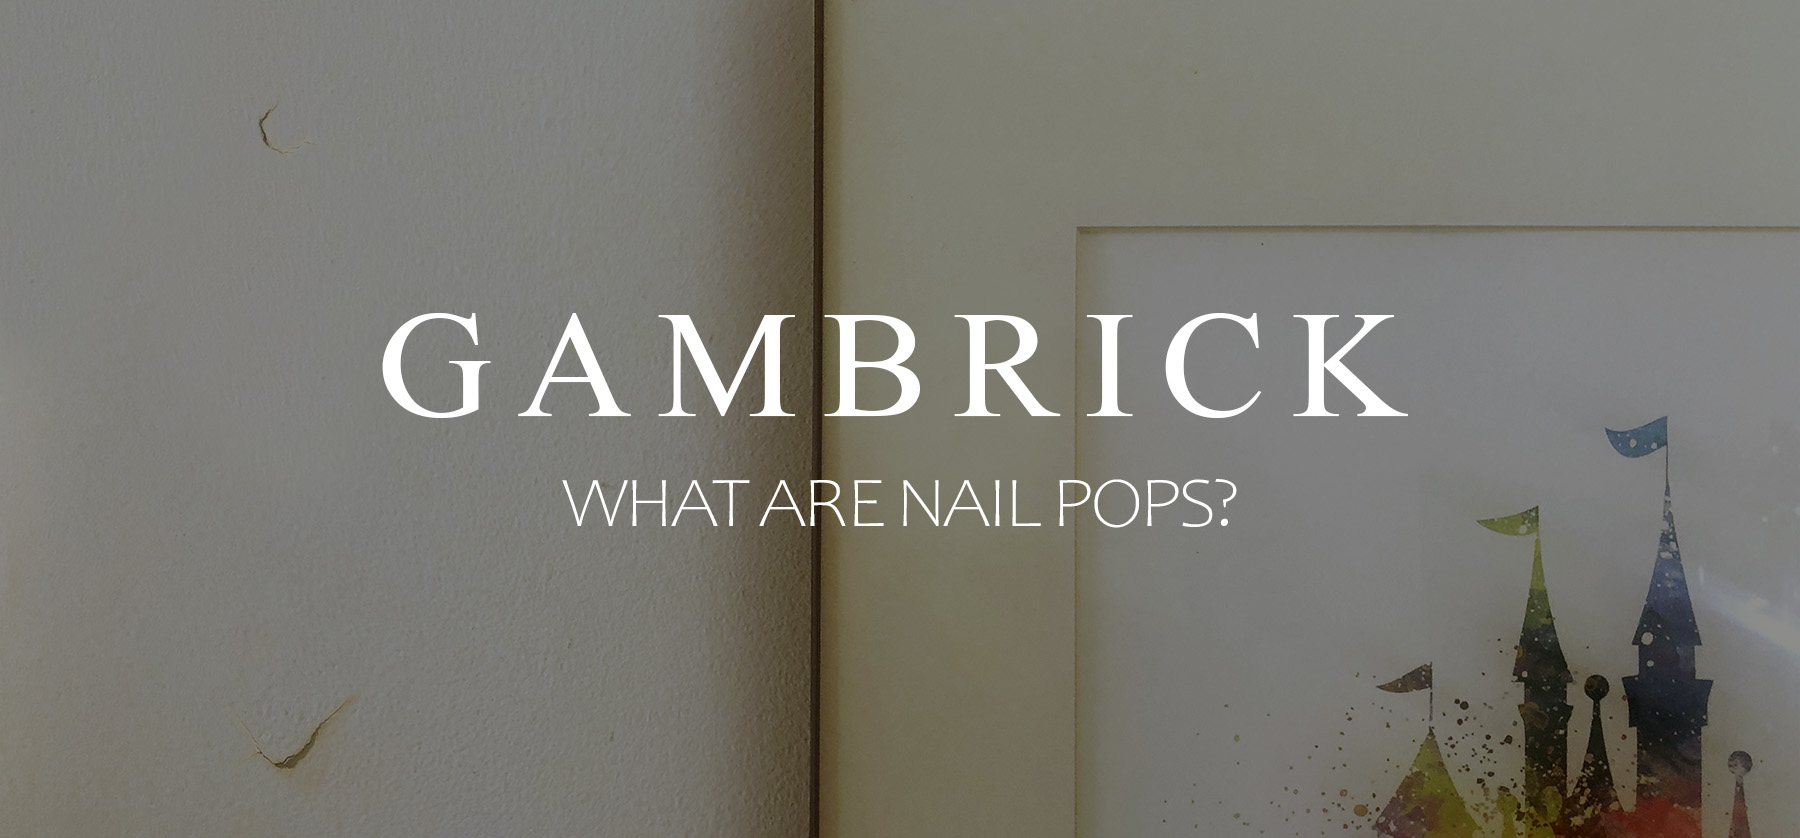 what are nail pops banner 1.0